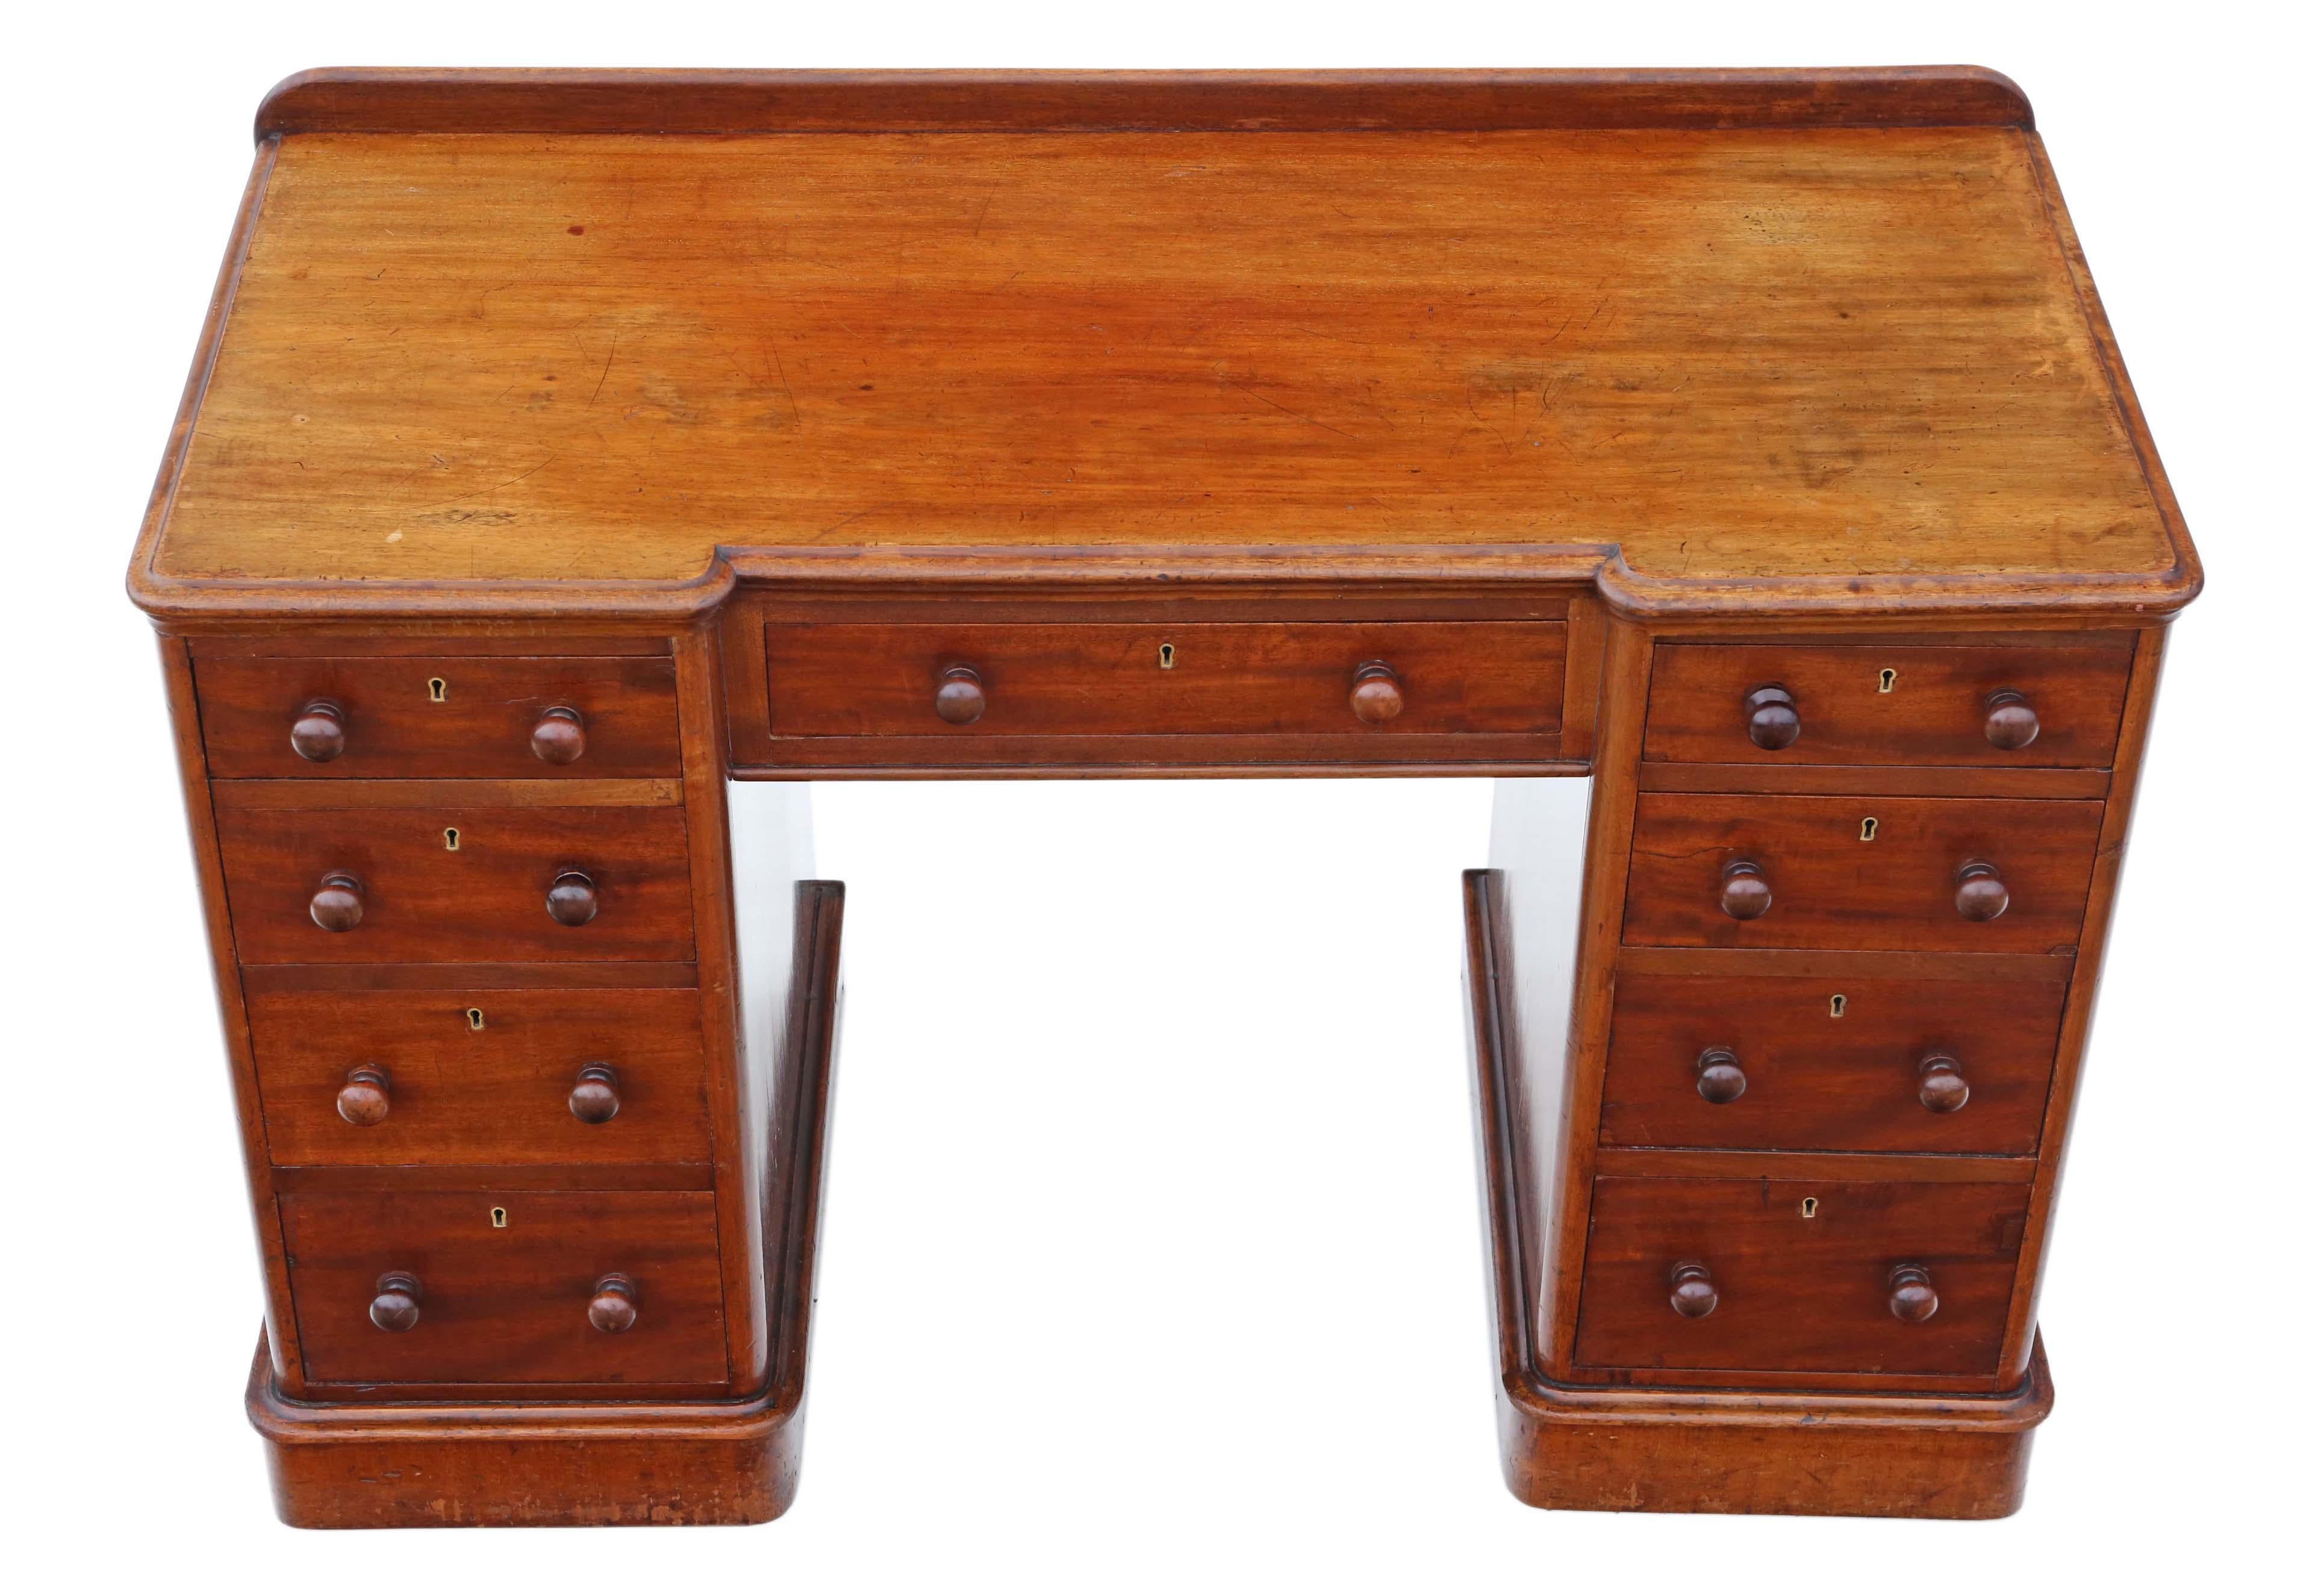 Antique quality Victorian mahogany desk writing dressing table twin pedestal.
This is a lovely quality piece that is full of age, charm and character. We have a key that fits all locks.
Solid, heavy and with no loose joints, a very rare find.
No